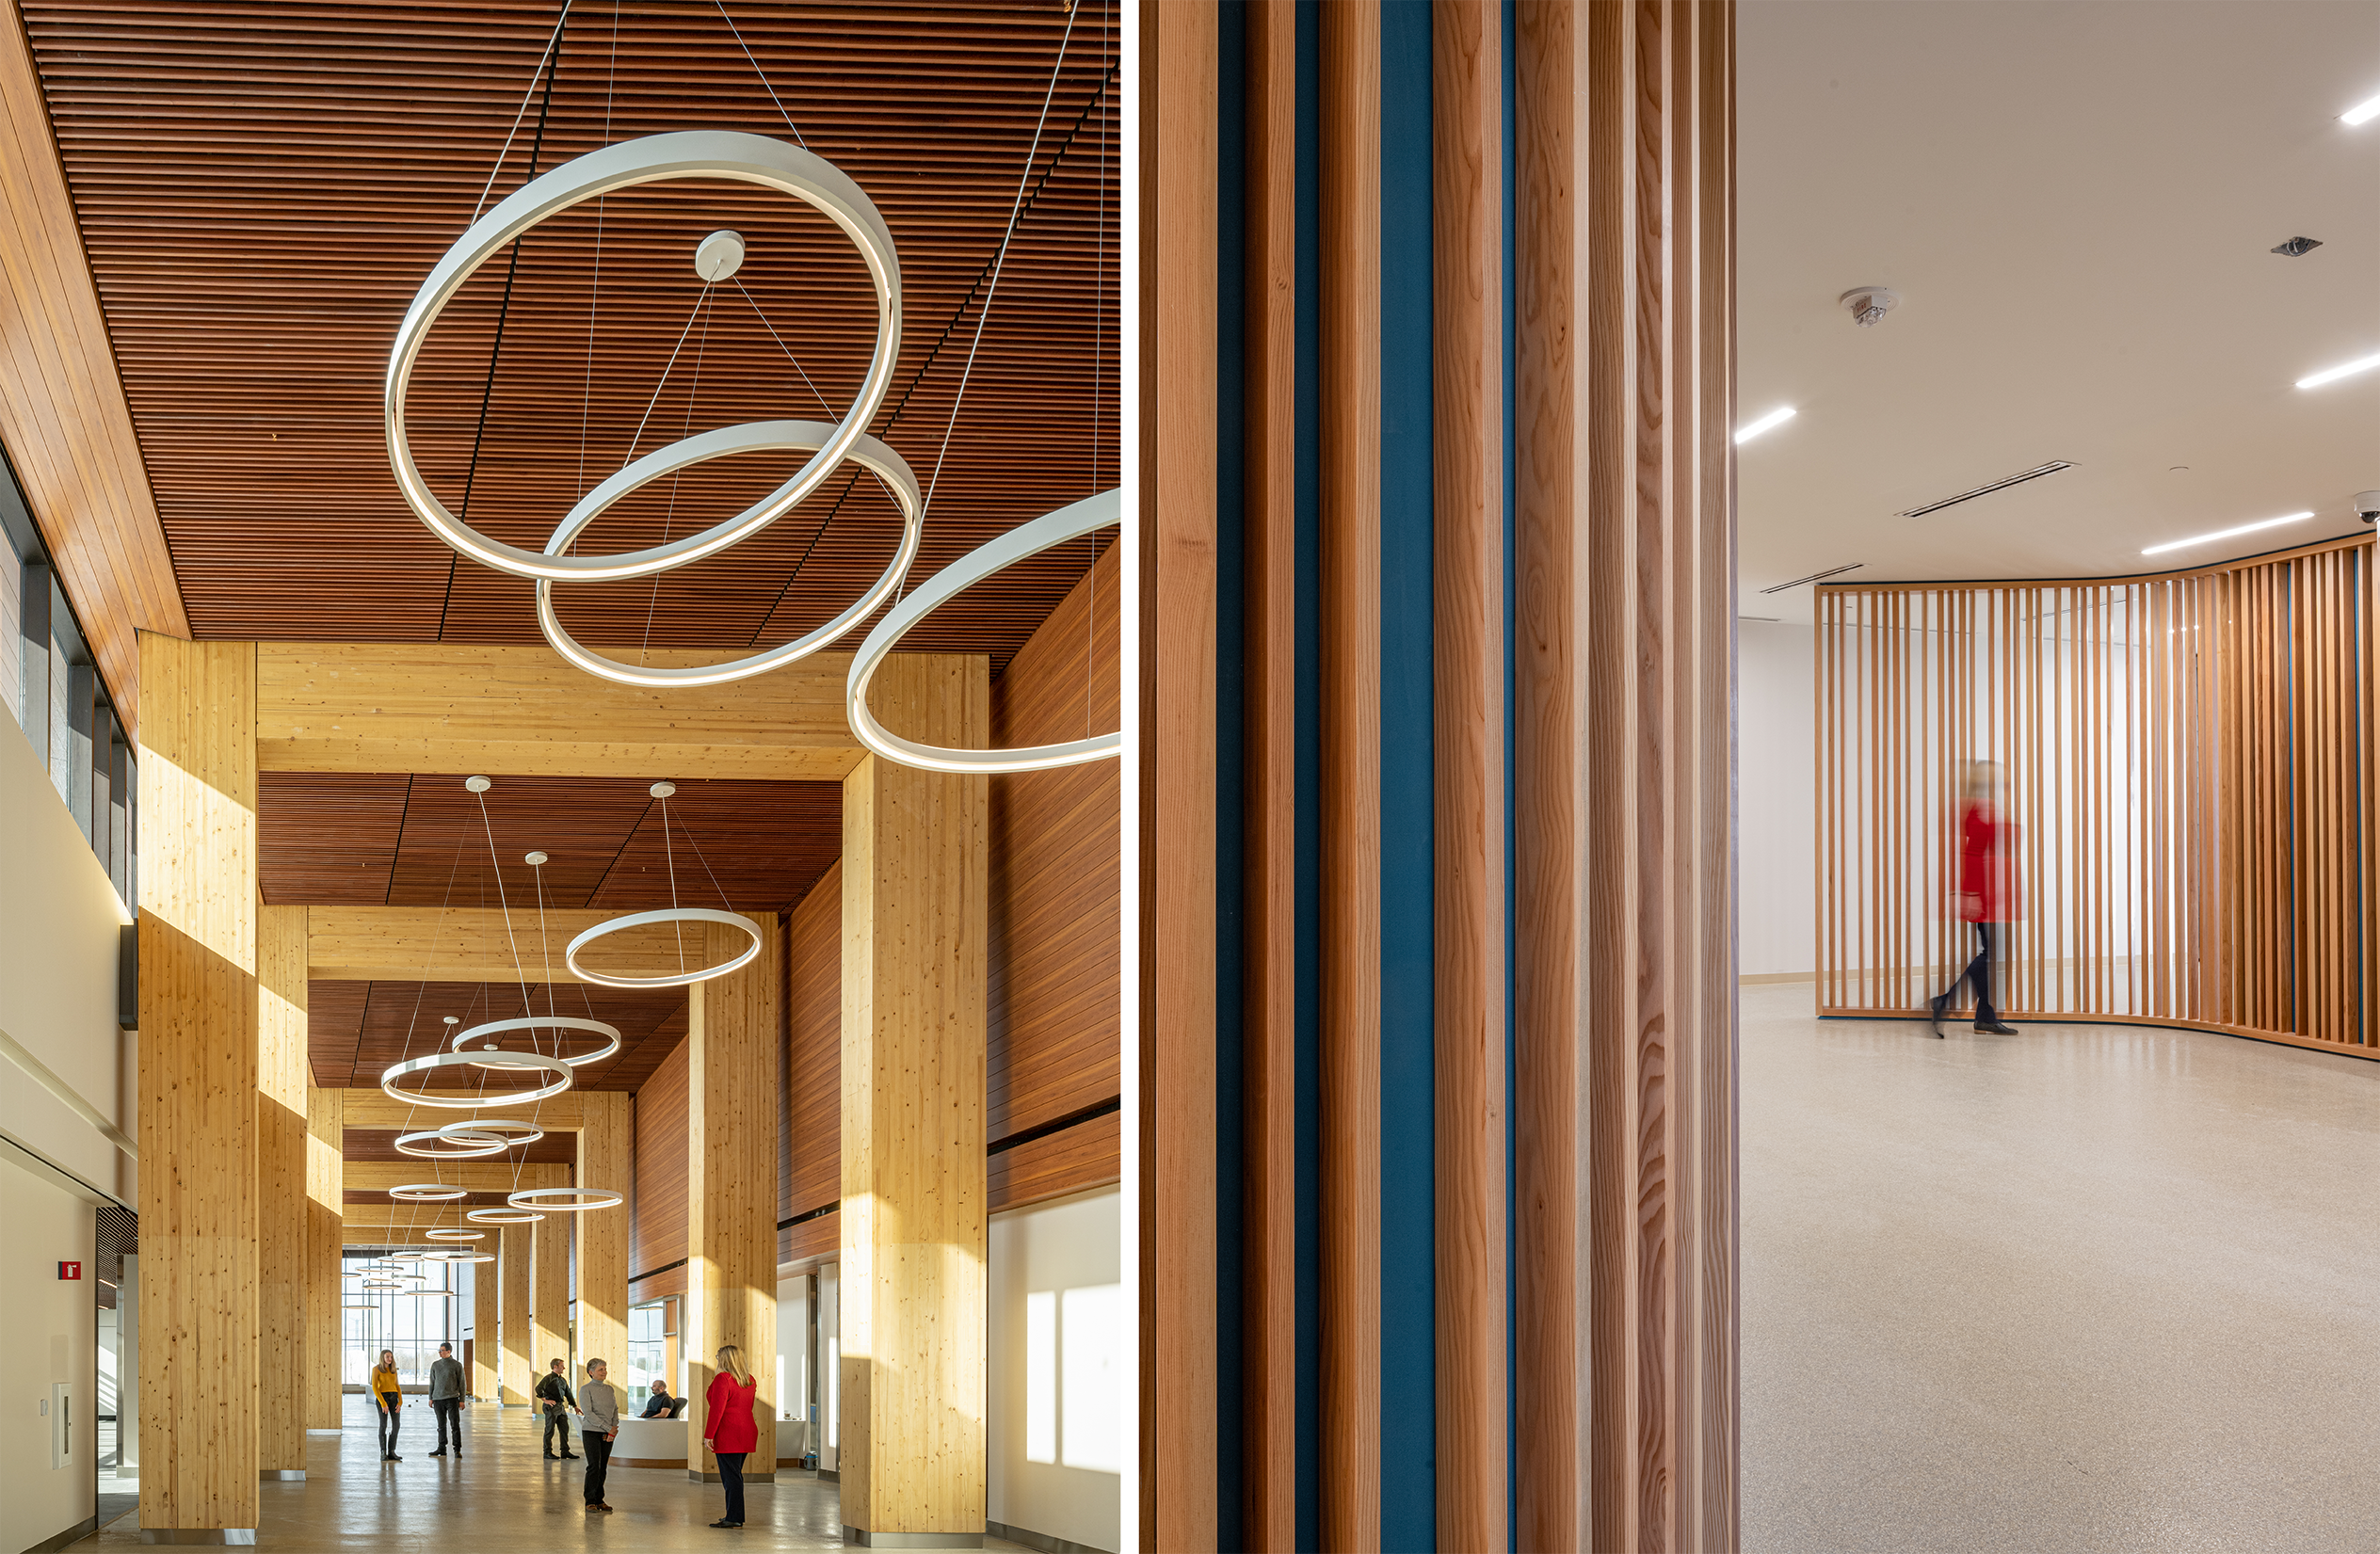 Left: A figure passes by a partition composed of thin wooden slats of varying distances apart. Right: Thick glulam columns and beams frame a long, curved corridor terminating with a glazed wall. People mingle throughout.